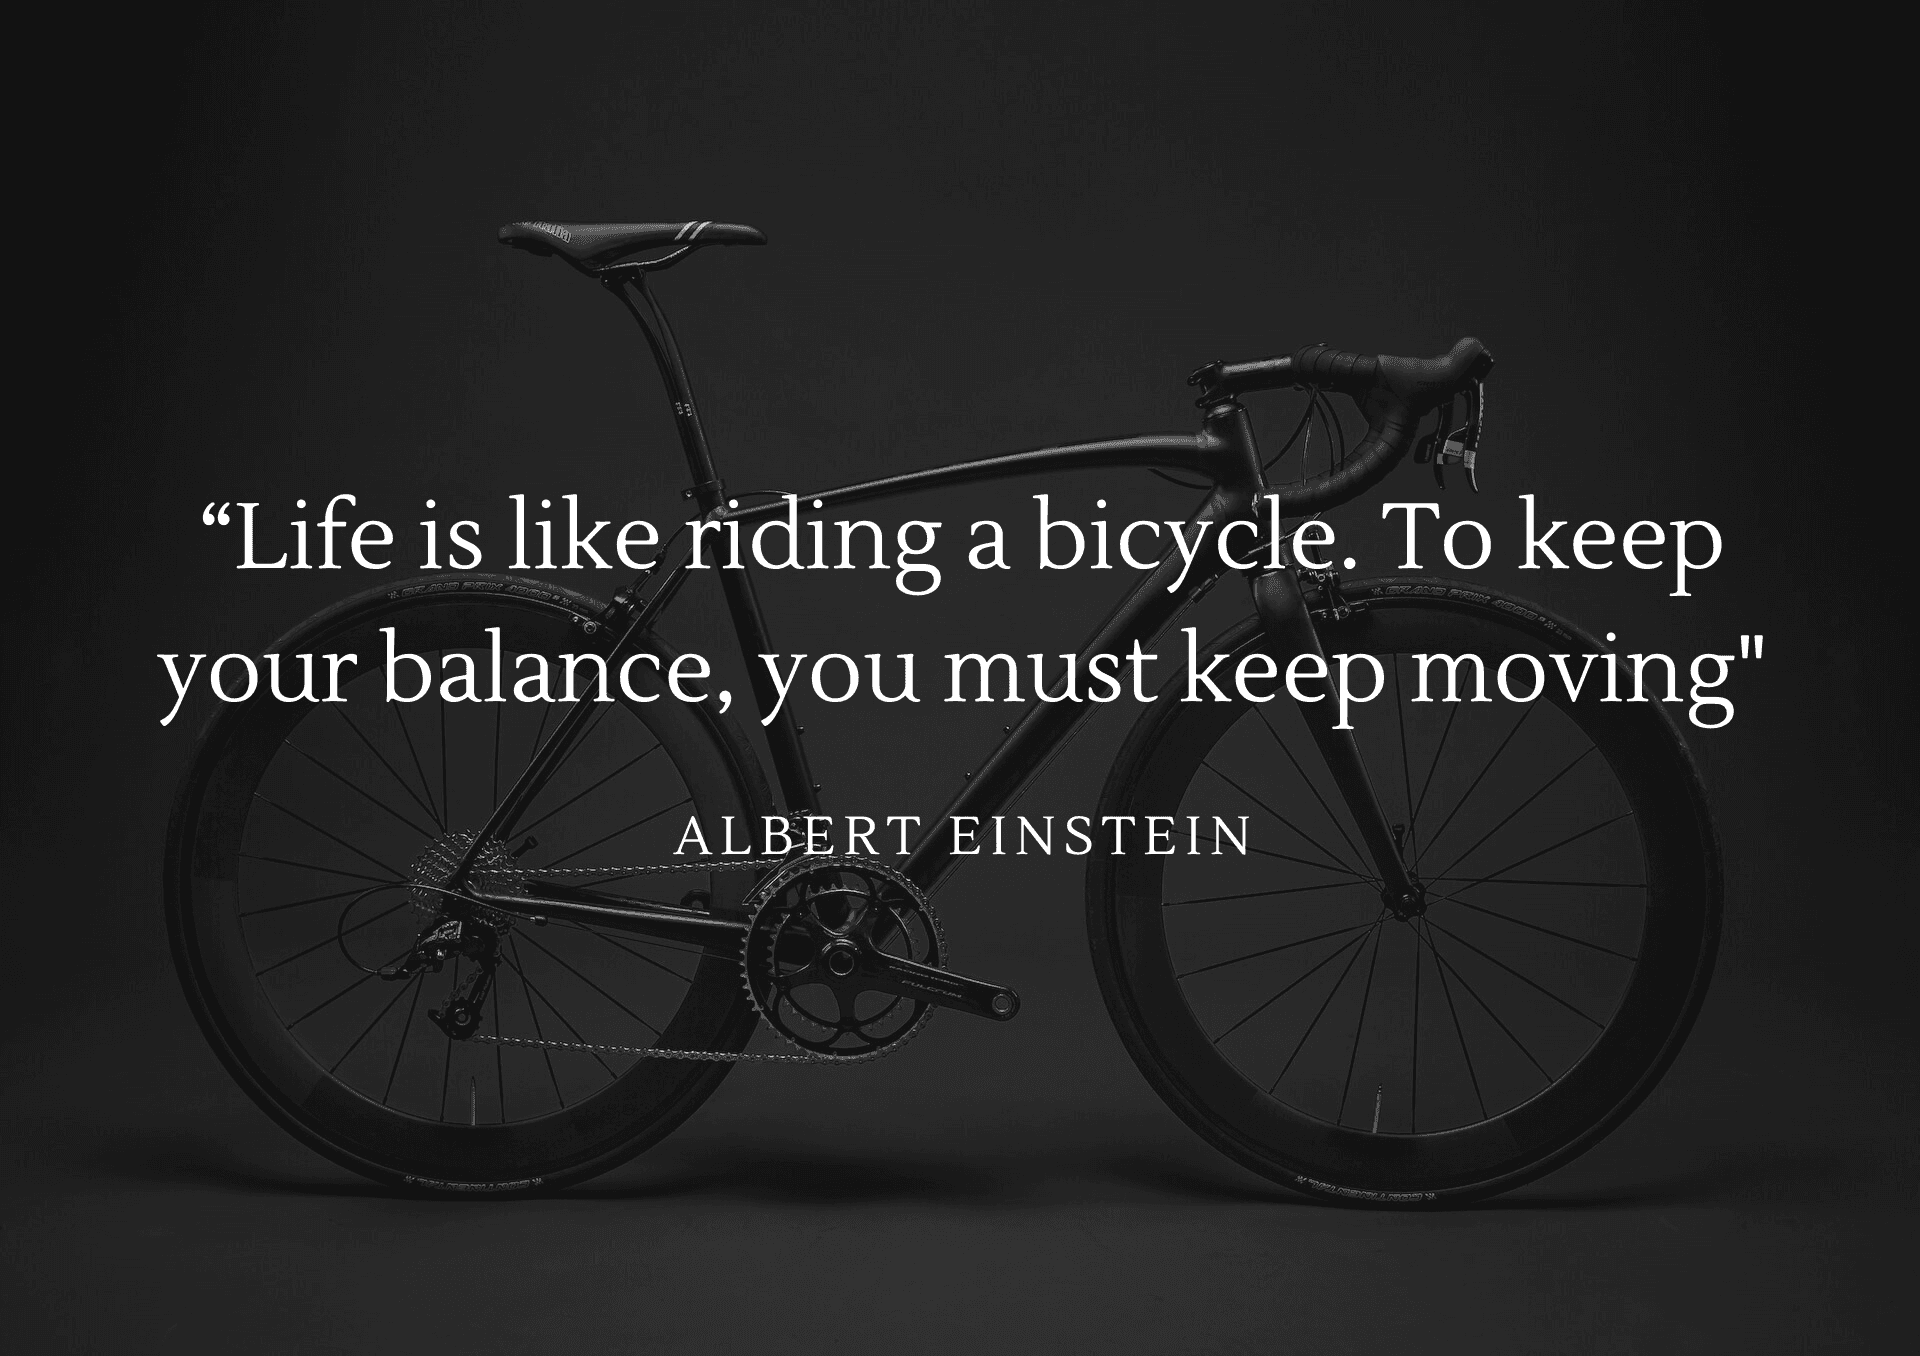 Cover Image for Balancing Life’s Bicycle: The Einstein Guide to Resilience